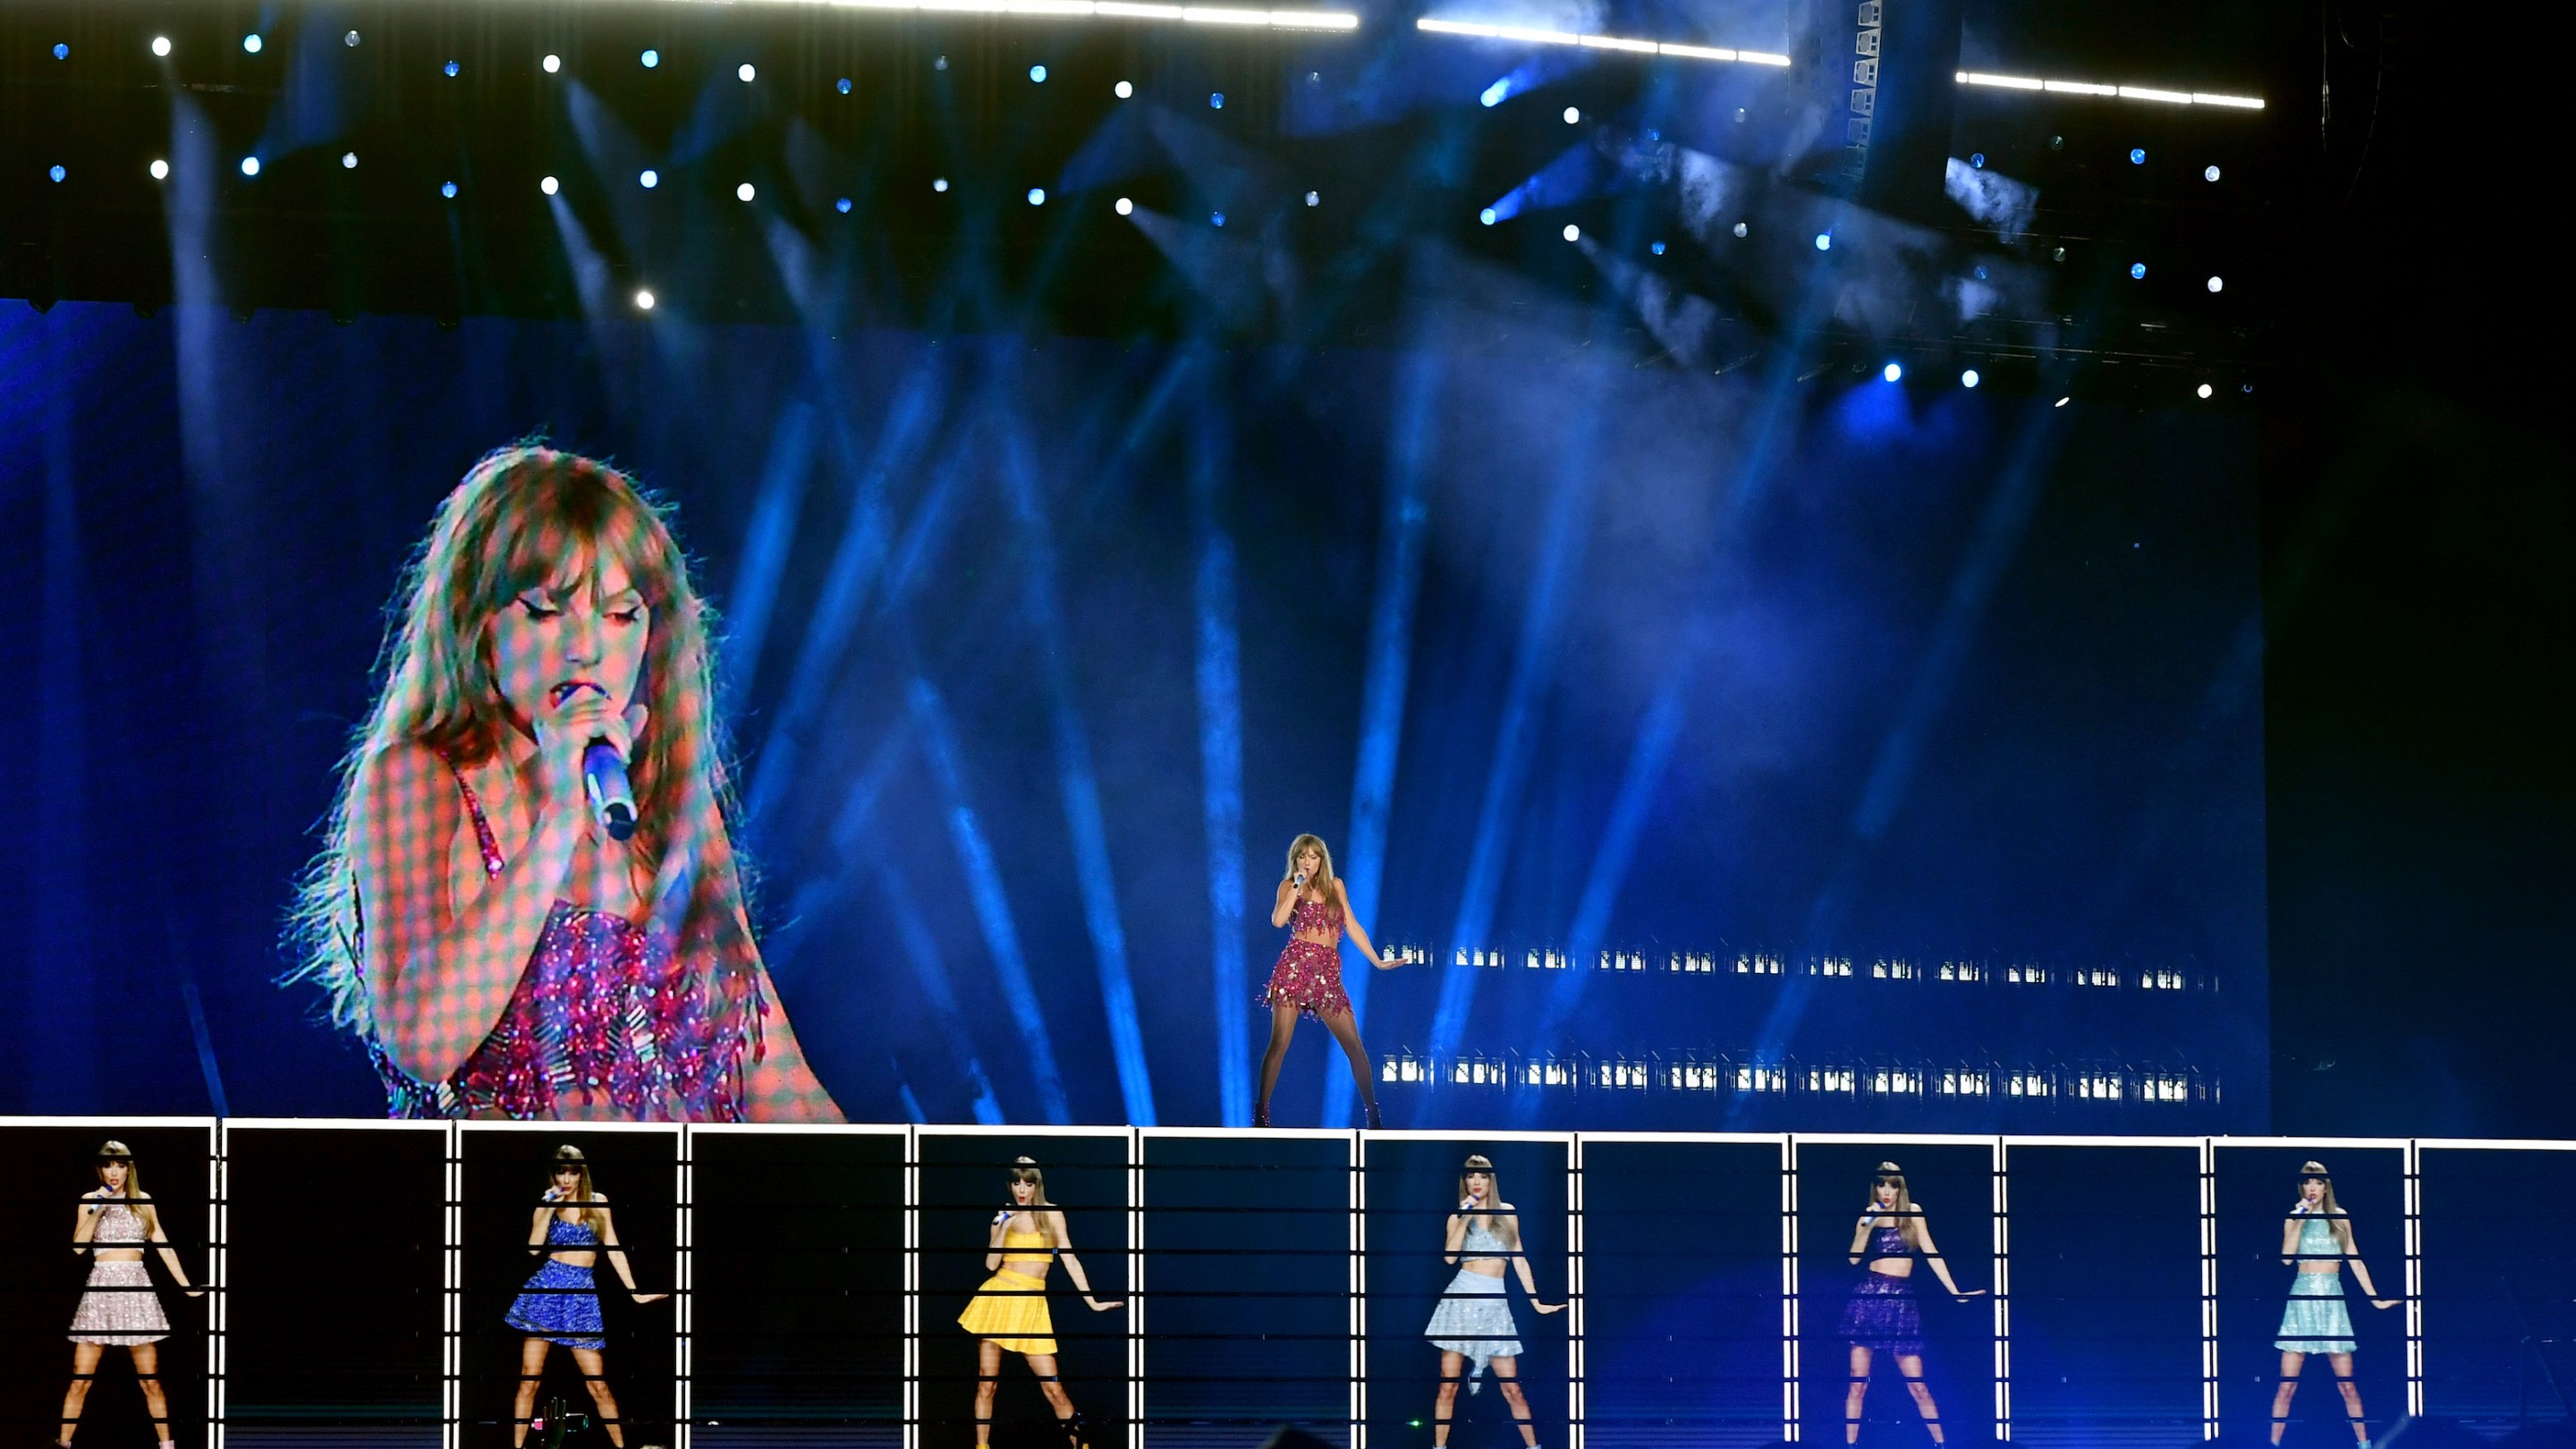 Taylor Swift performing, with some help from a video projection of herself and some other smaller video versions of herself, during her show in Kansas City.